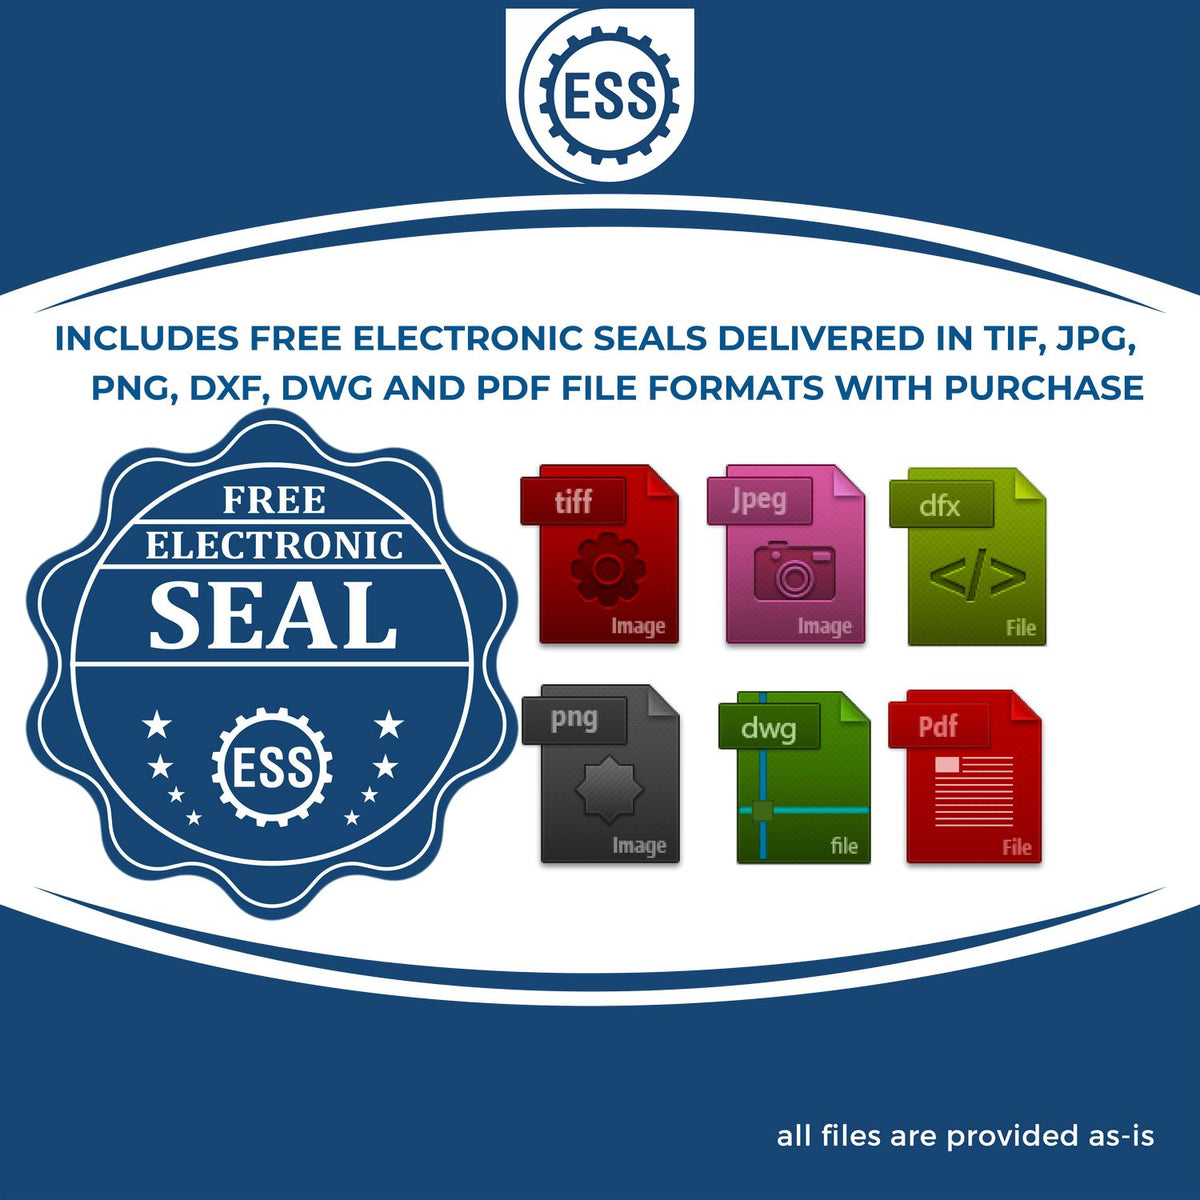 An infographic for the free electronic seal for the State of Tennessee Extended Long Reach Engineer Seal illustrating the different file type icons such as DXF, DWG, TIF, JPG and PNG.